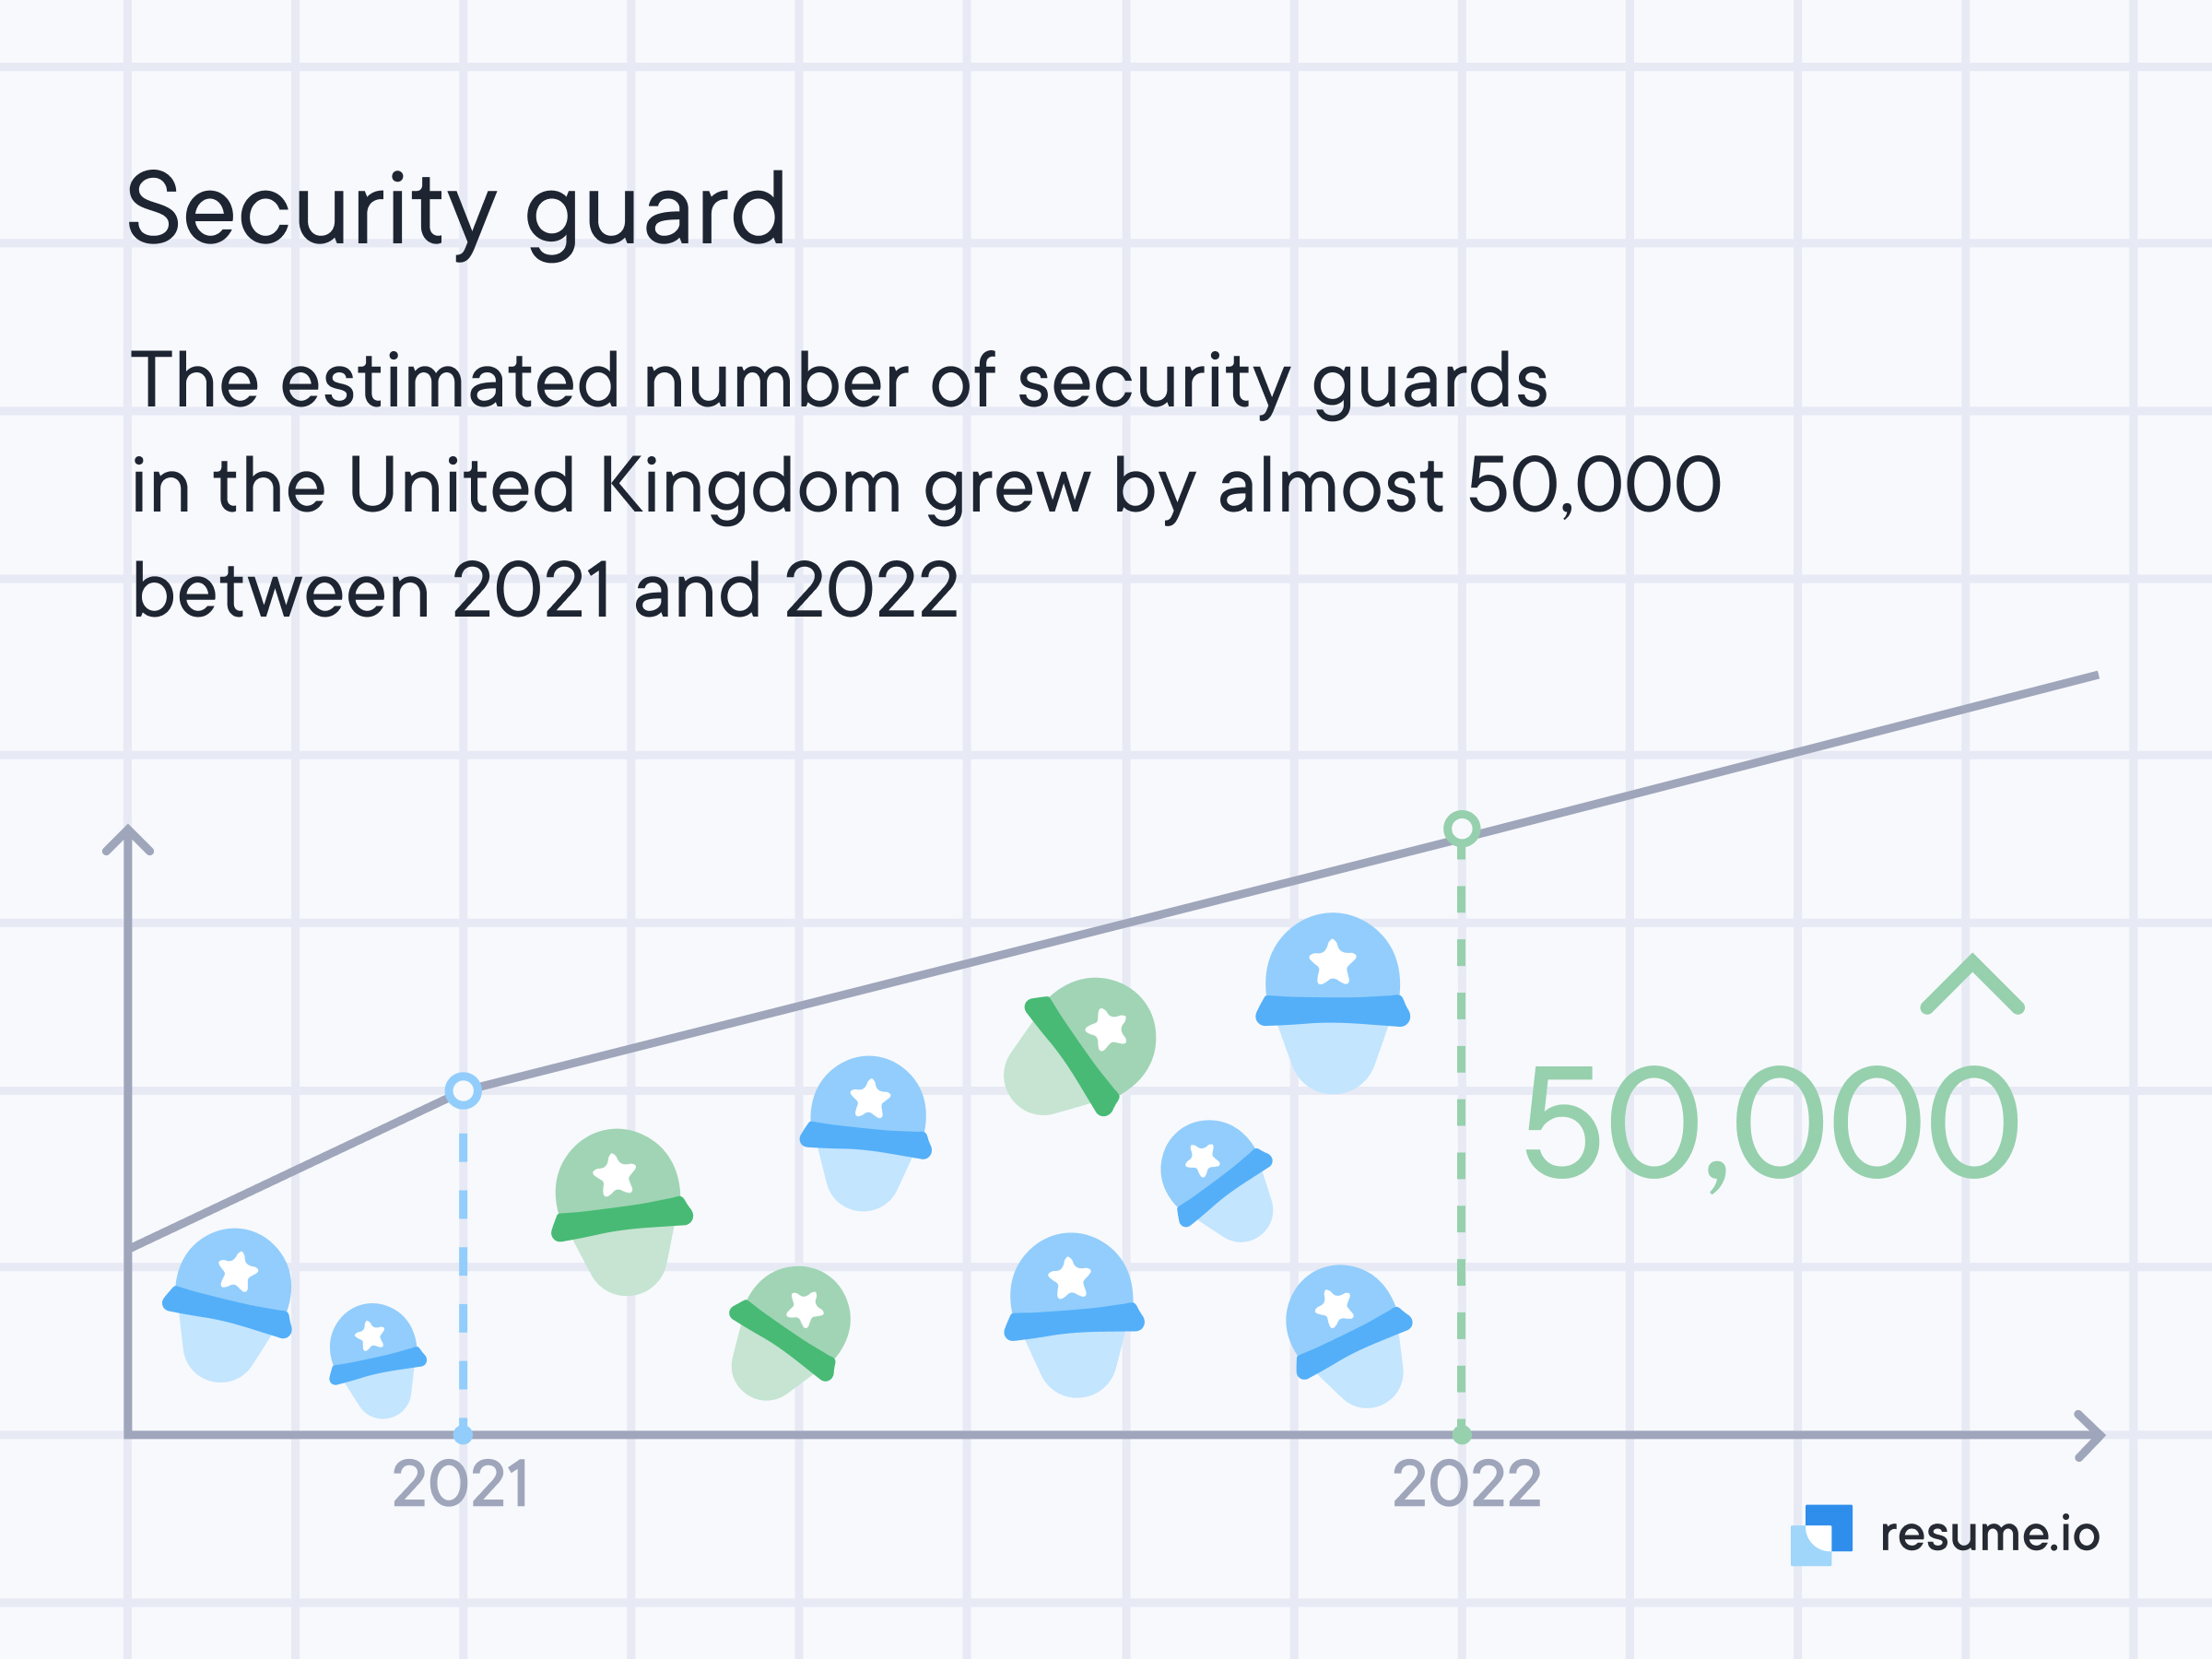 Line chart representing the growth of security guards